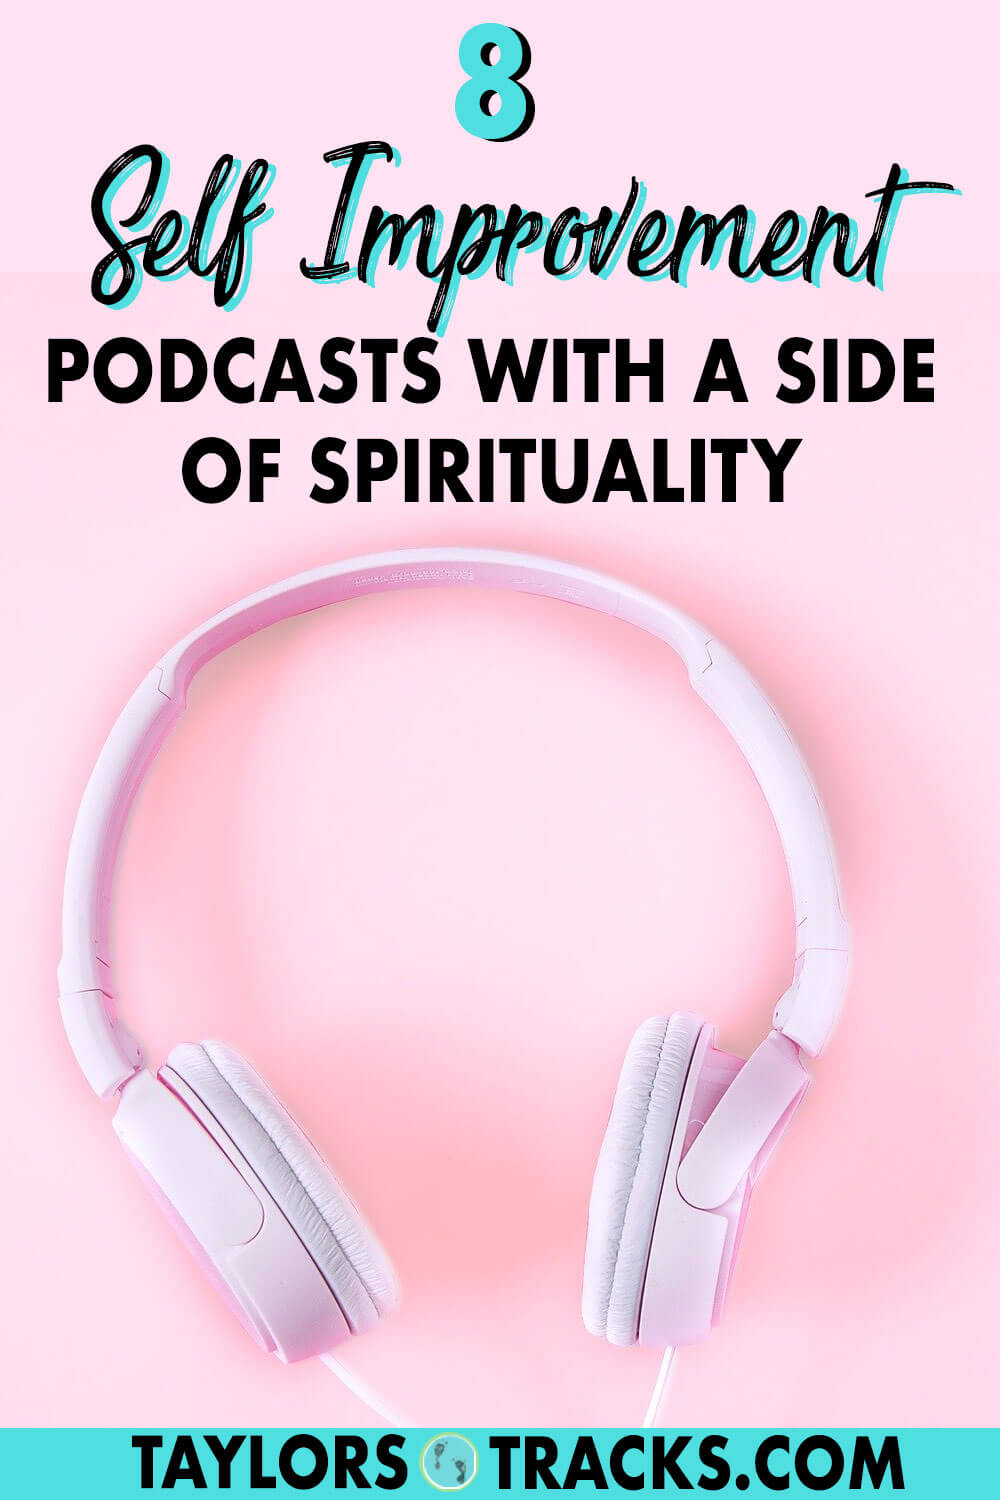 Find inspirational podcasts for self improvement that will take you from self doubt to confidence. This list of podcasts for women are a mix of personal development and spirituality, balancing the masculine do with the feminine flow for the ultimate life of fulfillment. Click to find and start listening to top podcasts fo inspiration!